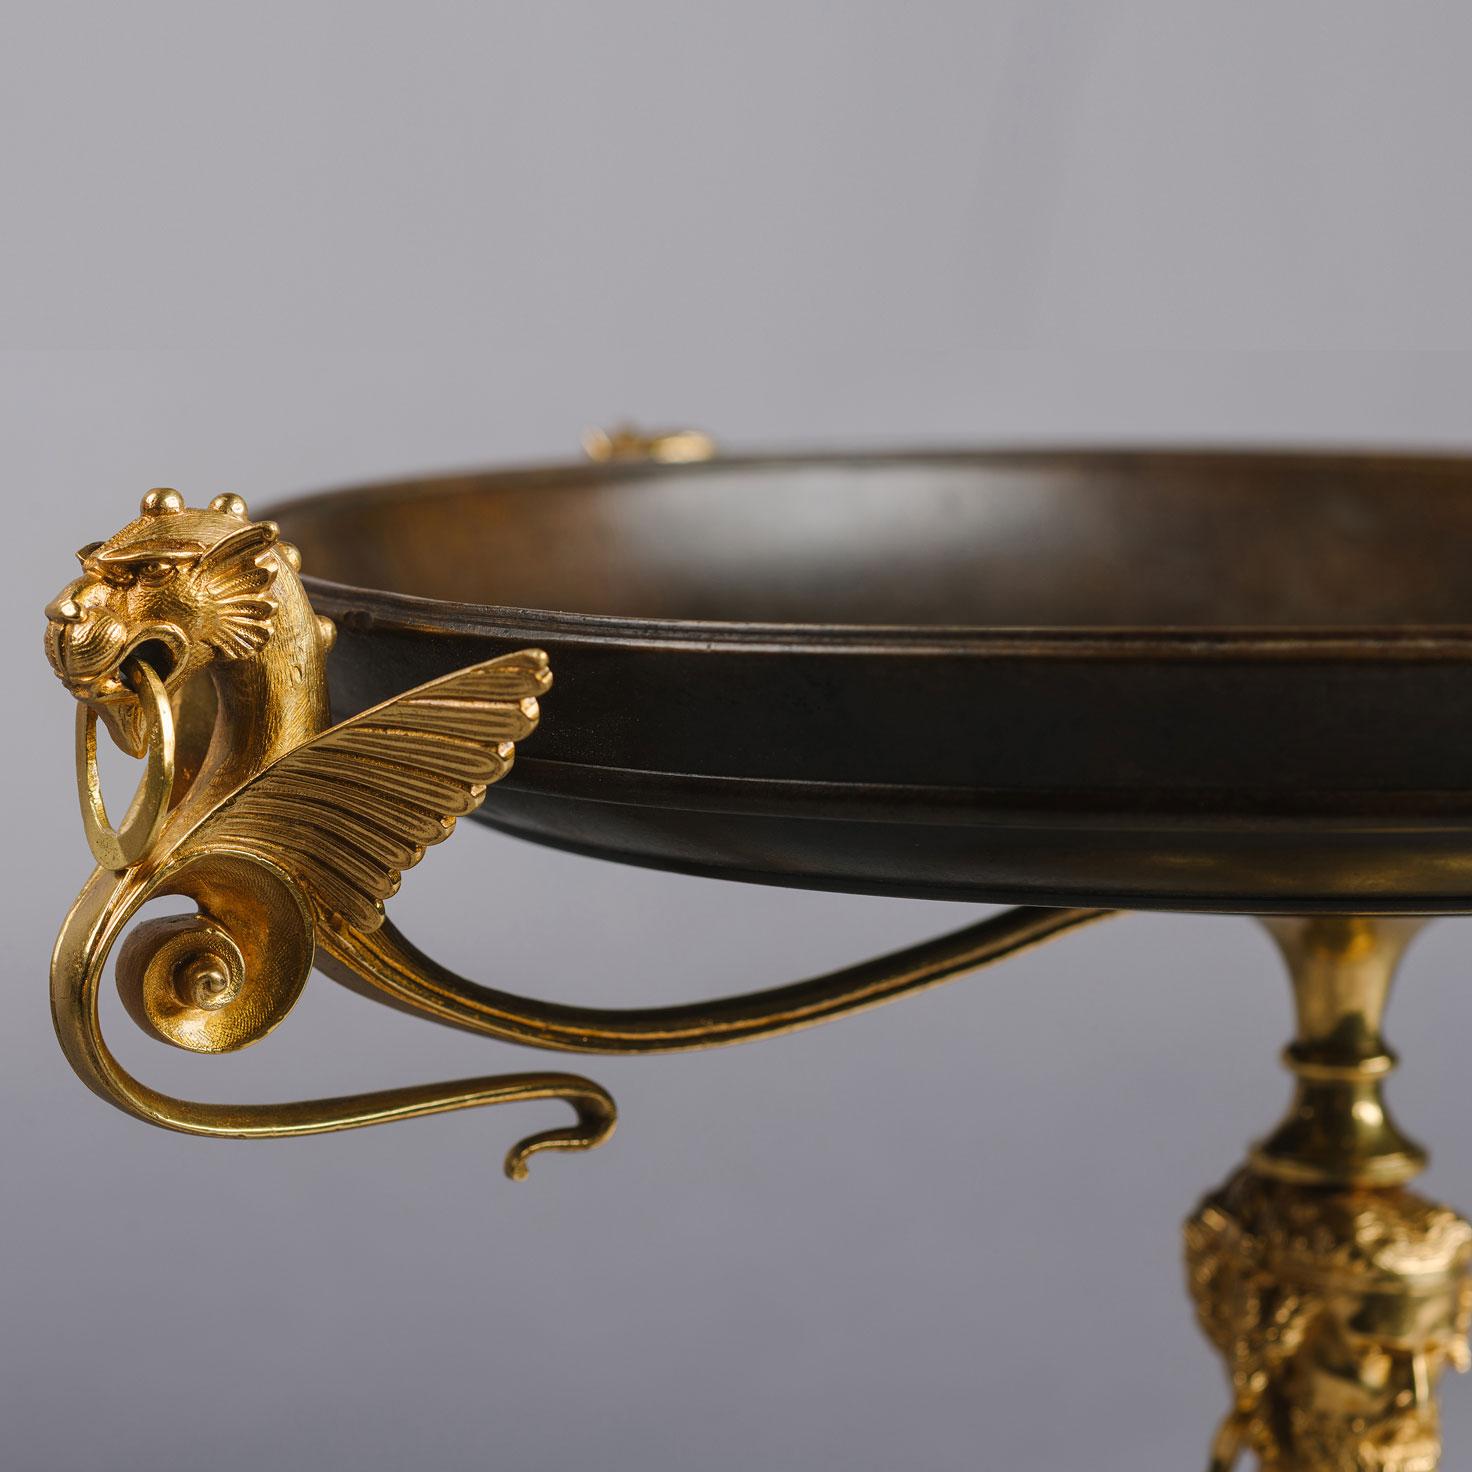 French Fine Neoclassical Revival Gilt and Patinated Bronze Tazza For Sale